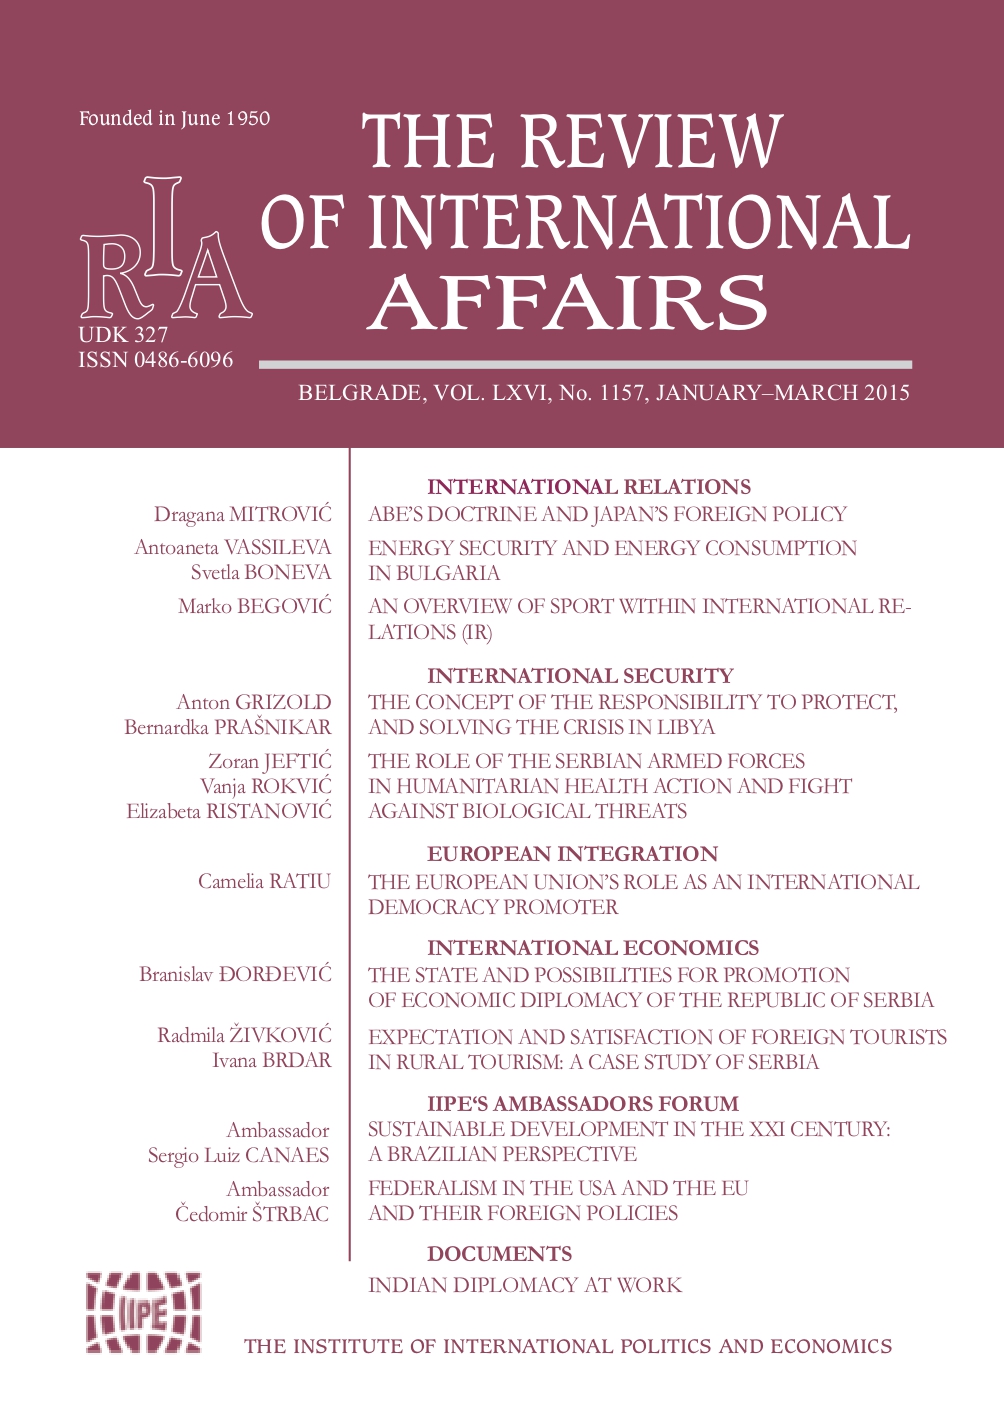 An overview of sport within international relations (IR) Cover Image